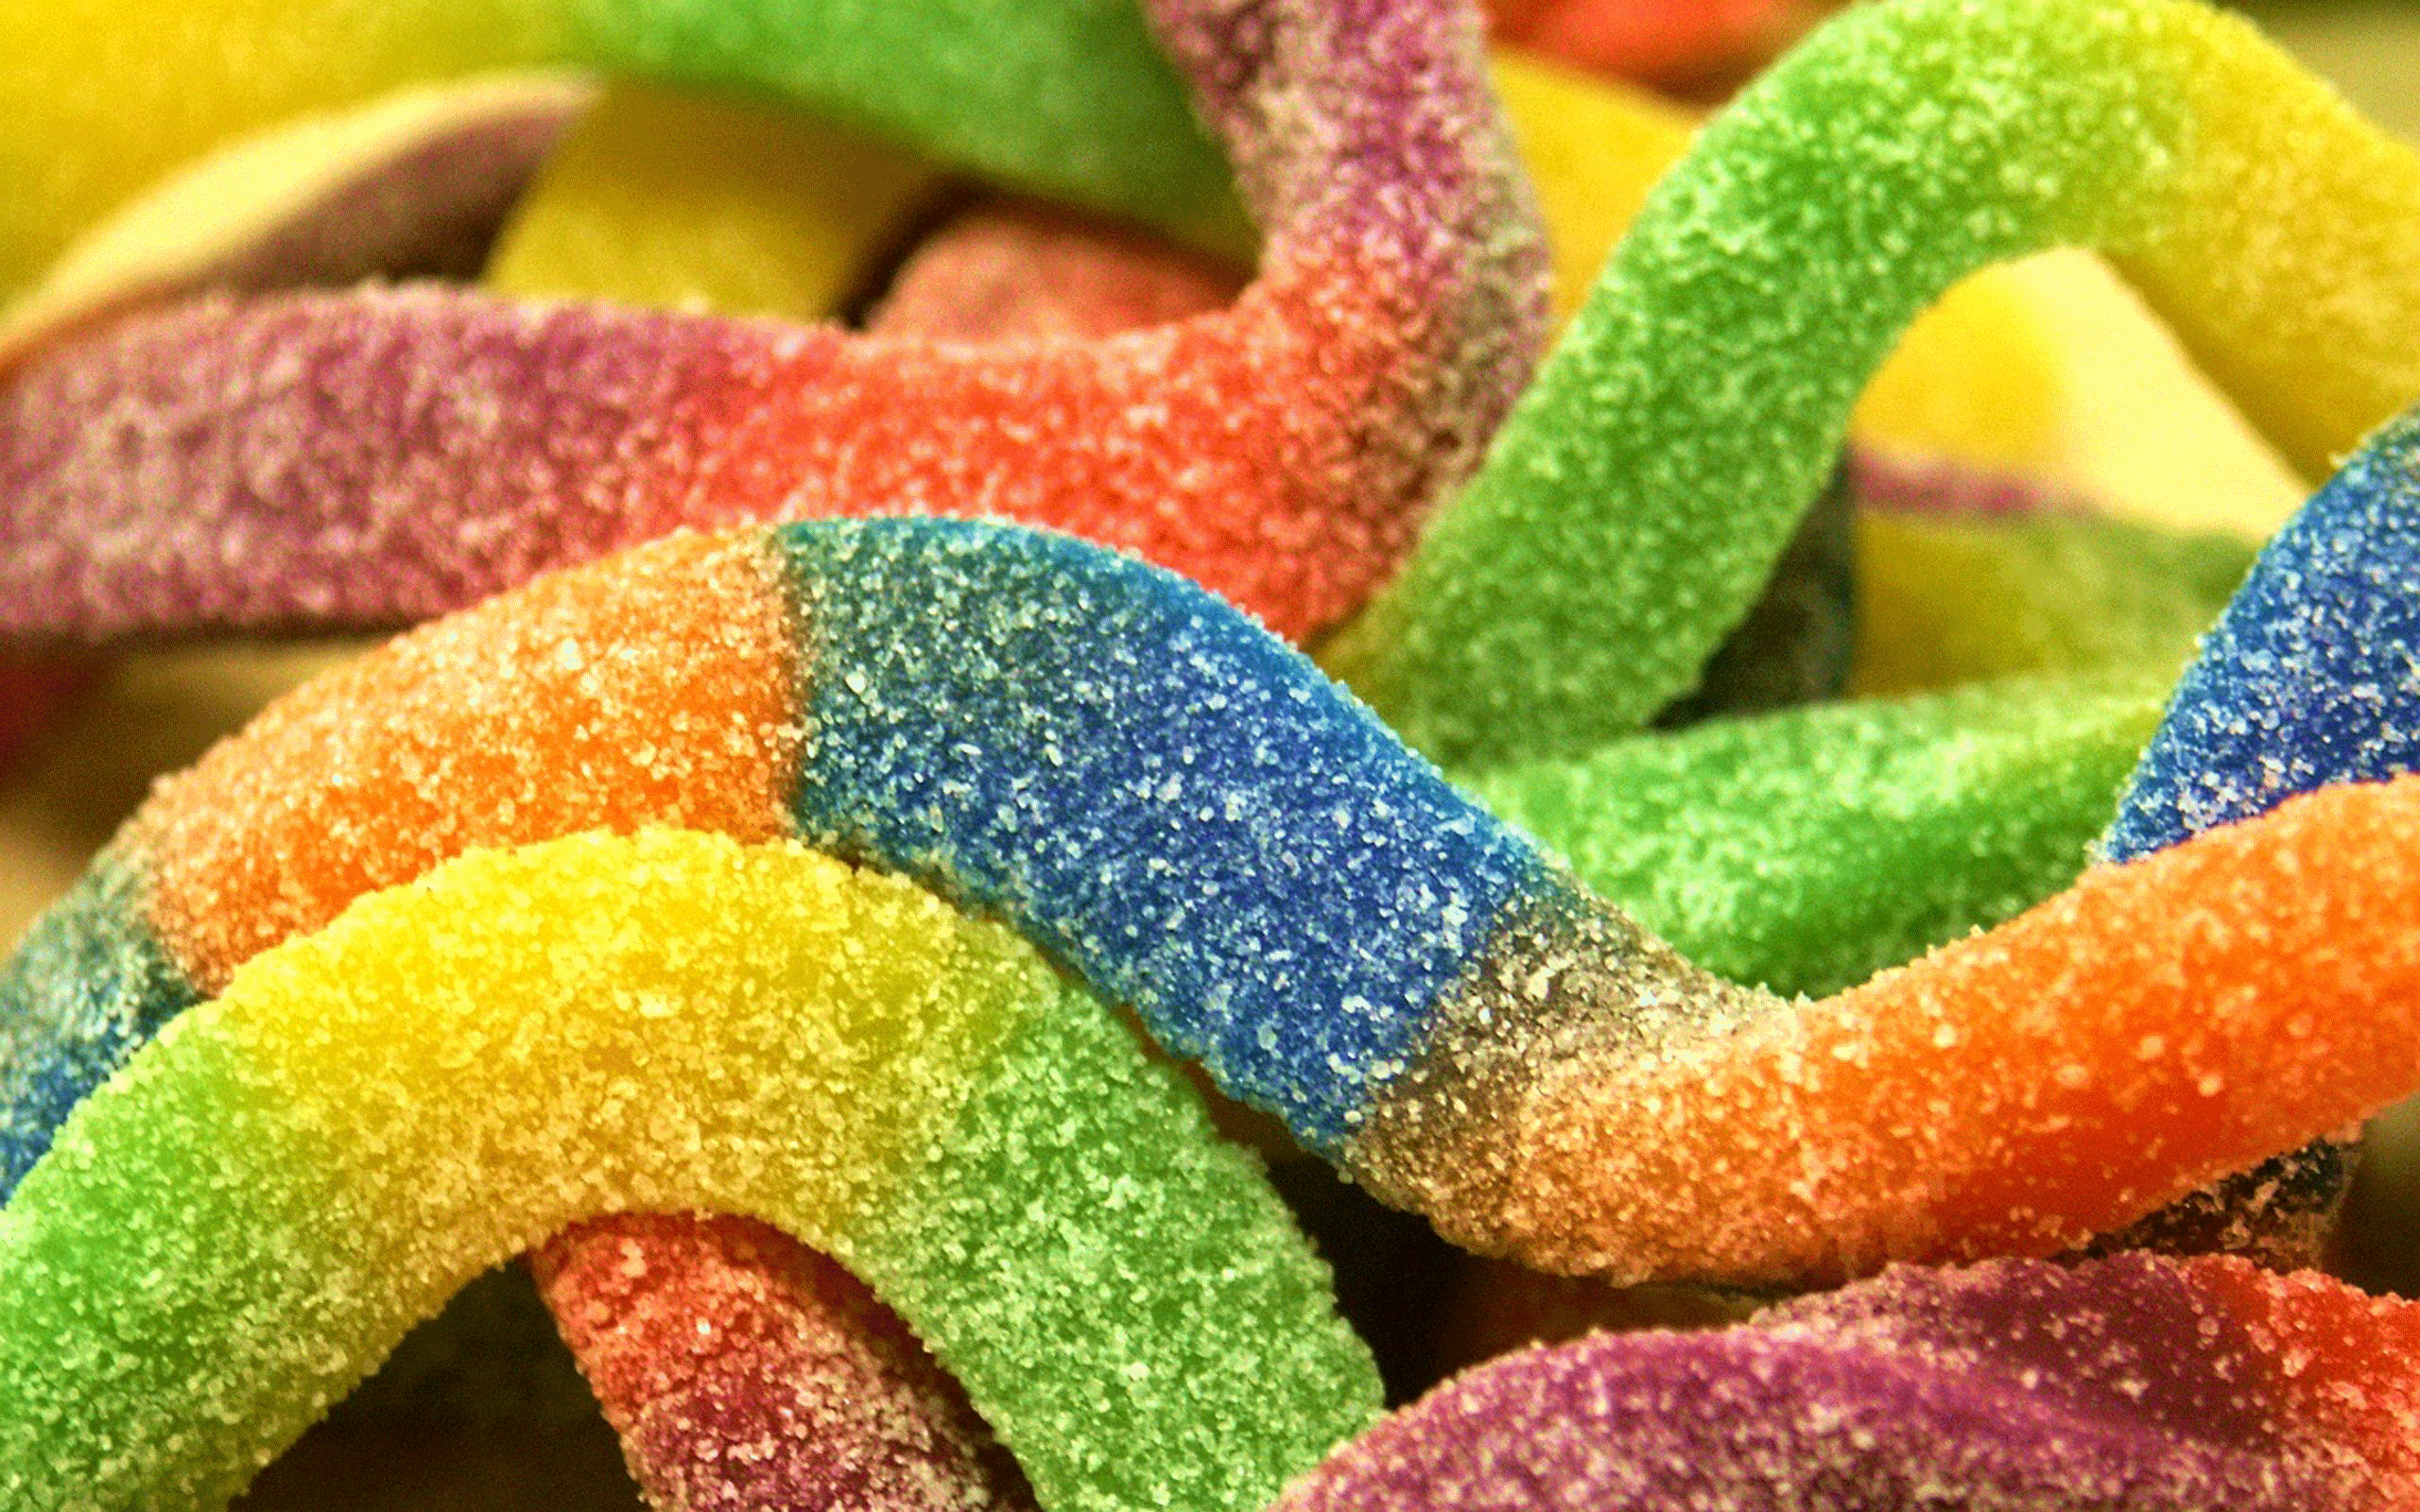 HD Sweet Candy Candies Wallpaper 1080p Full Size - HiReWallpapers ...